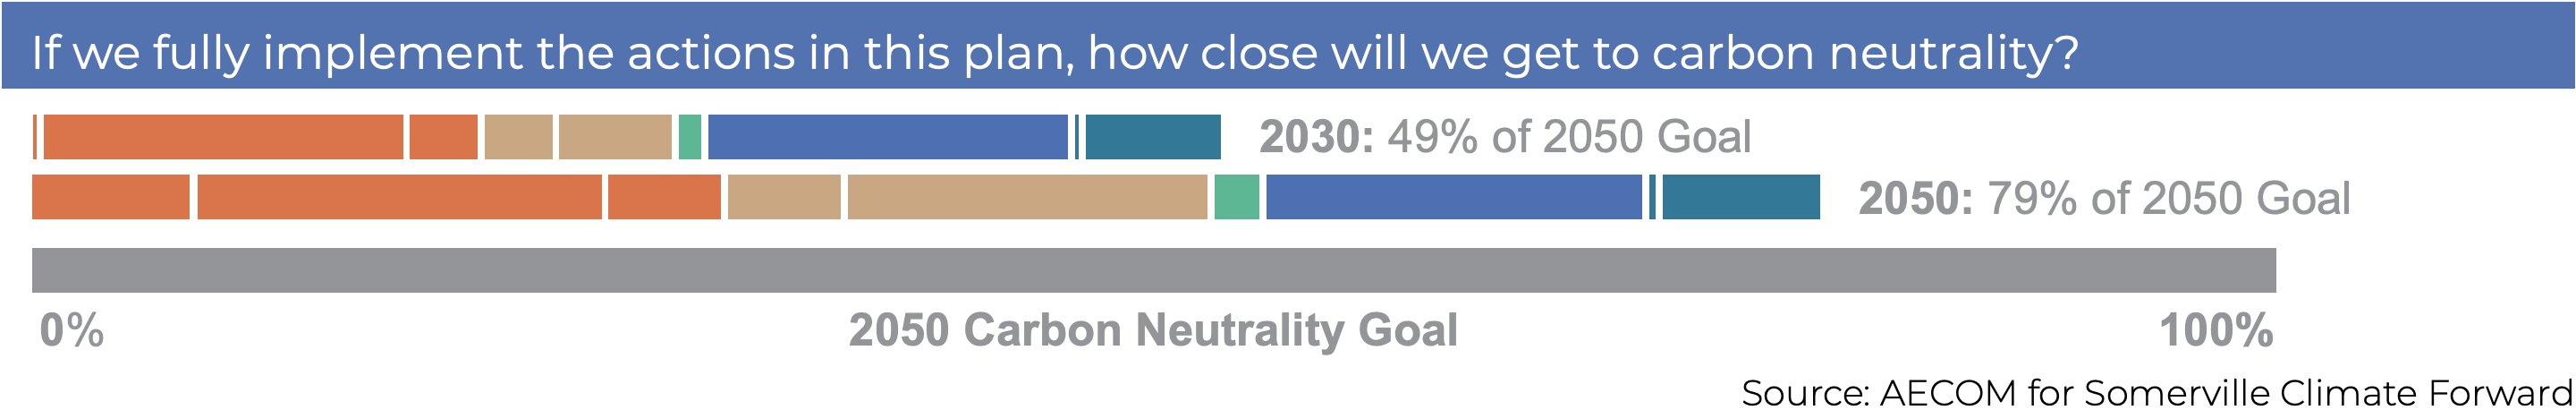 If we fully implement the plan actions, we should get to 49% of our 2050 goal by 2030, and 79% by 2050.